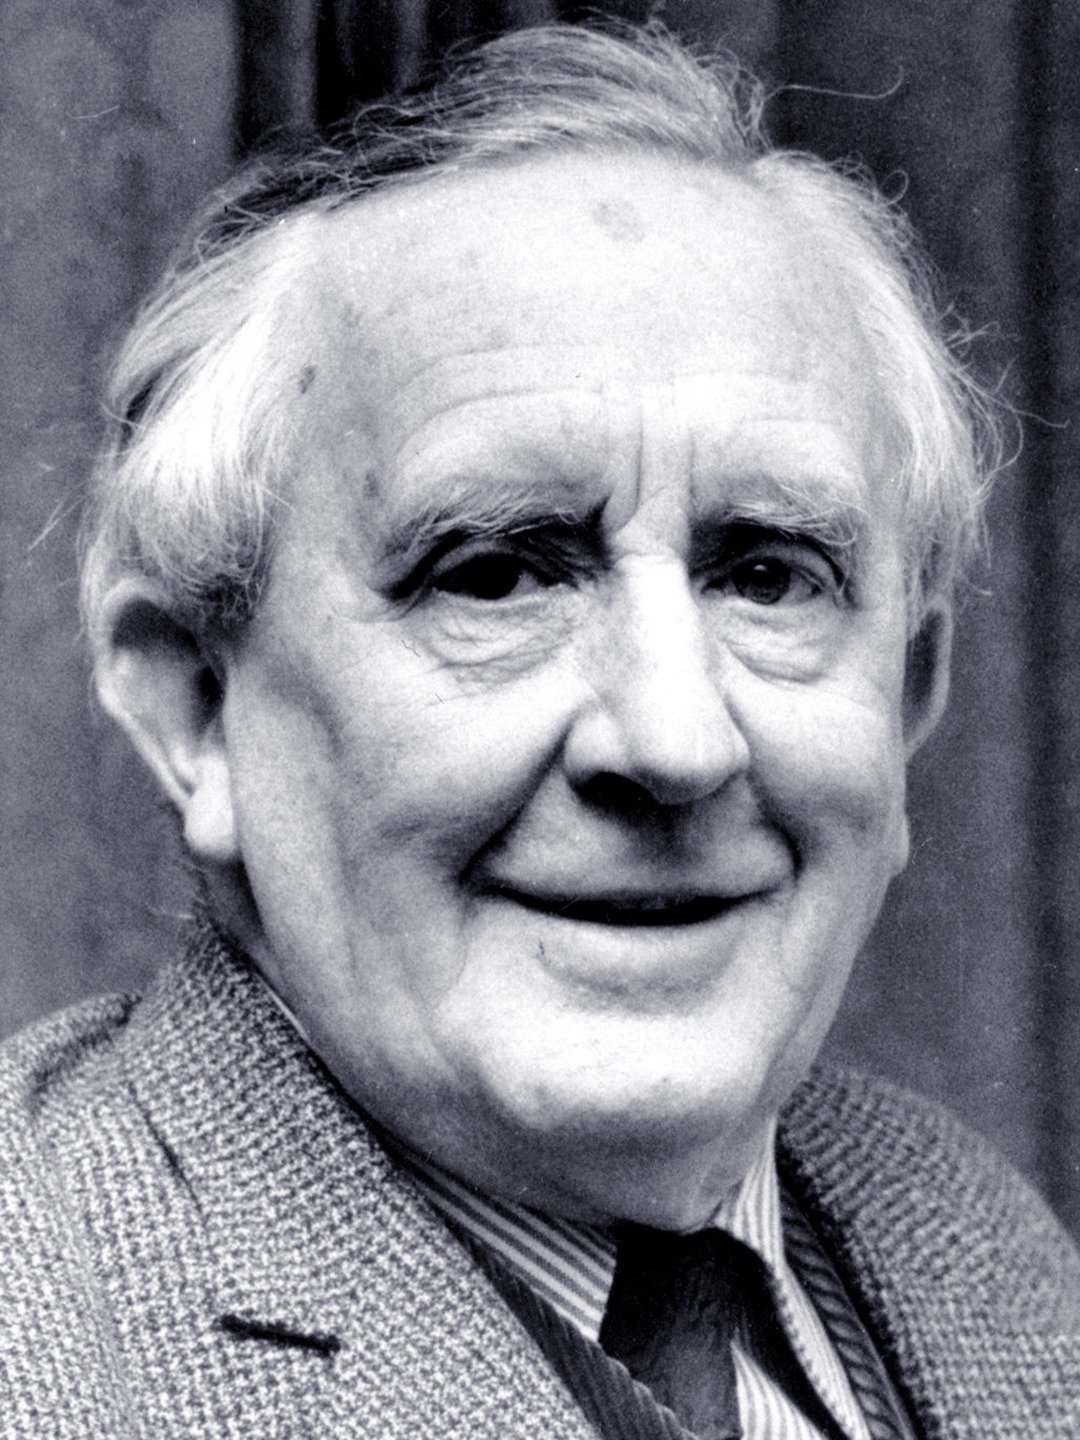 You are currently viewing Motivational J. R. R. Tolkien Quotes and Sayings